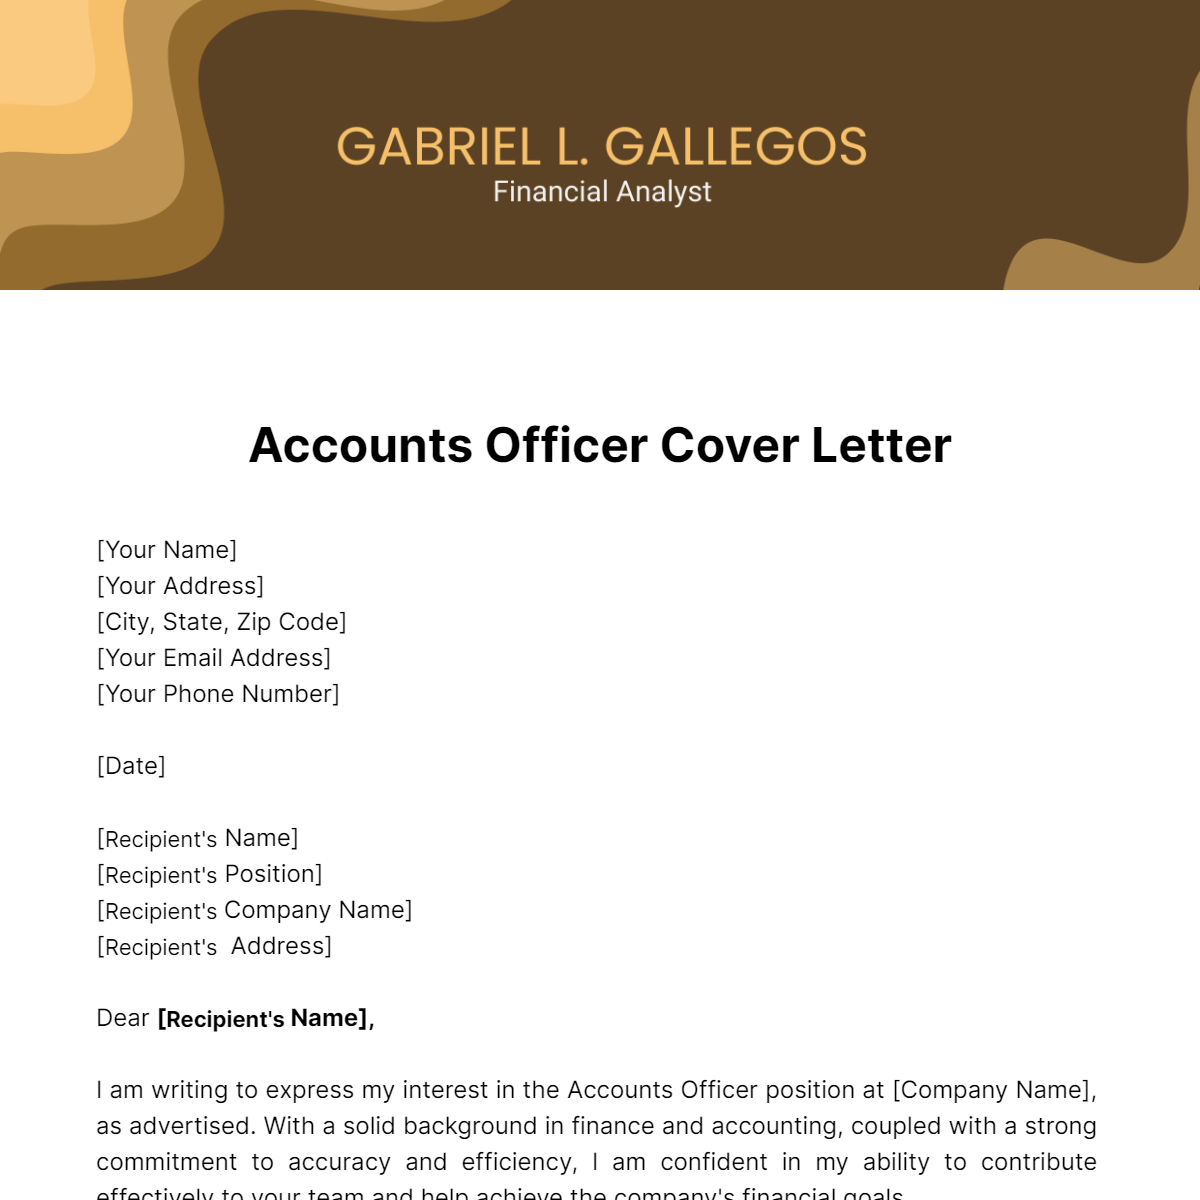 Accounts Officer Cover Letter Template